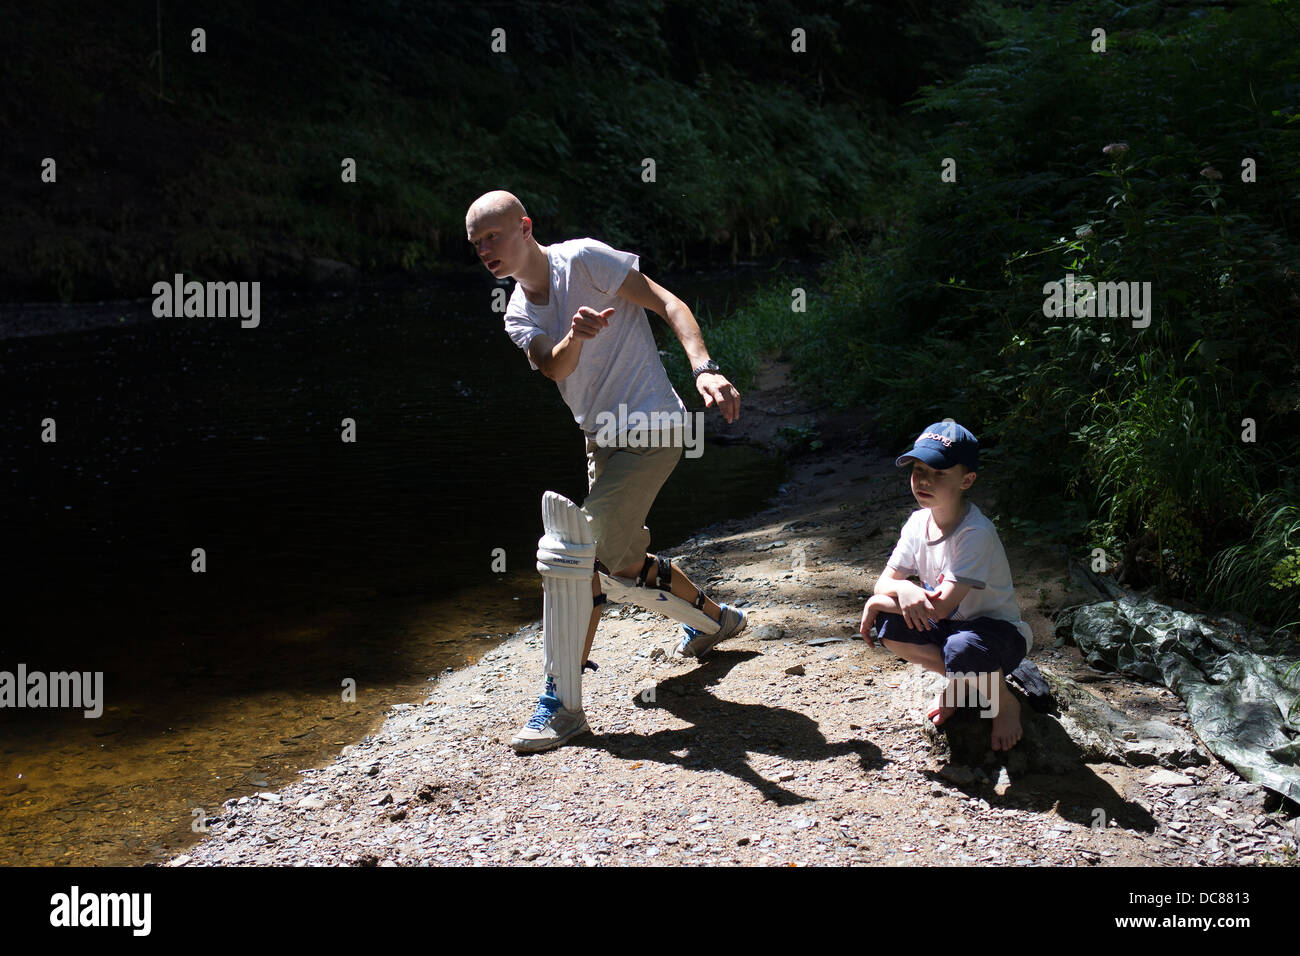 brothers skimming stones,river teign,cricket pads,balance,timing, active, activity, background, balance, blue, child, culture, e Stock Photo